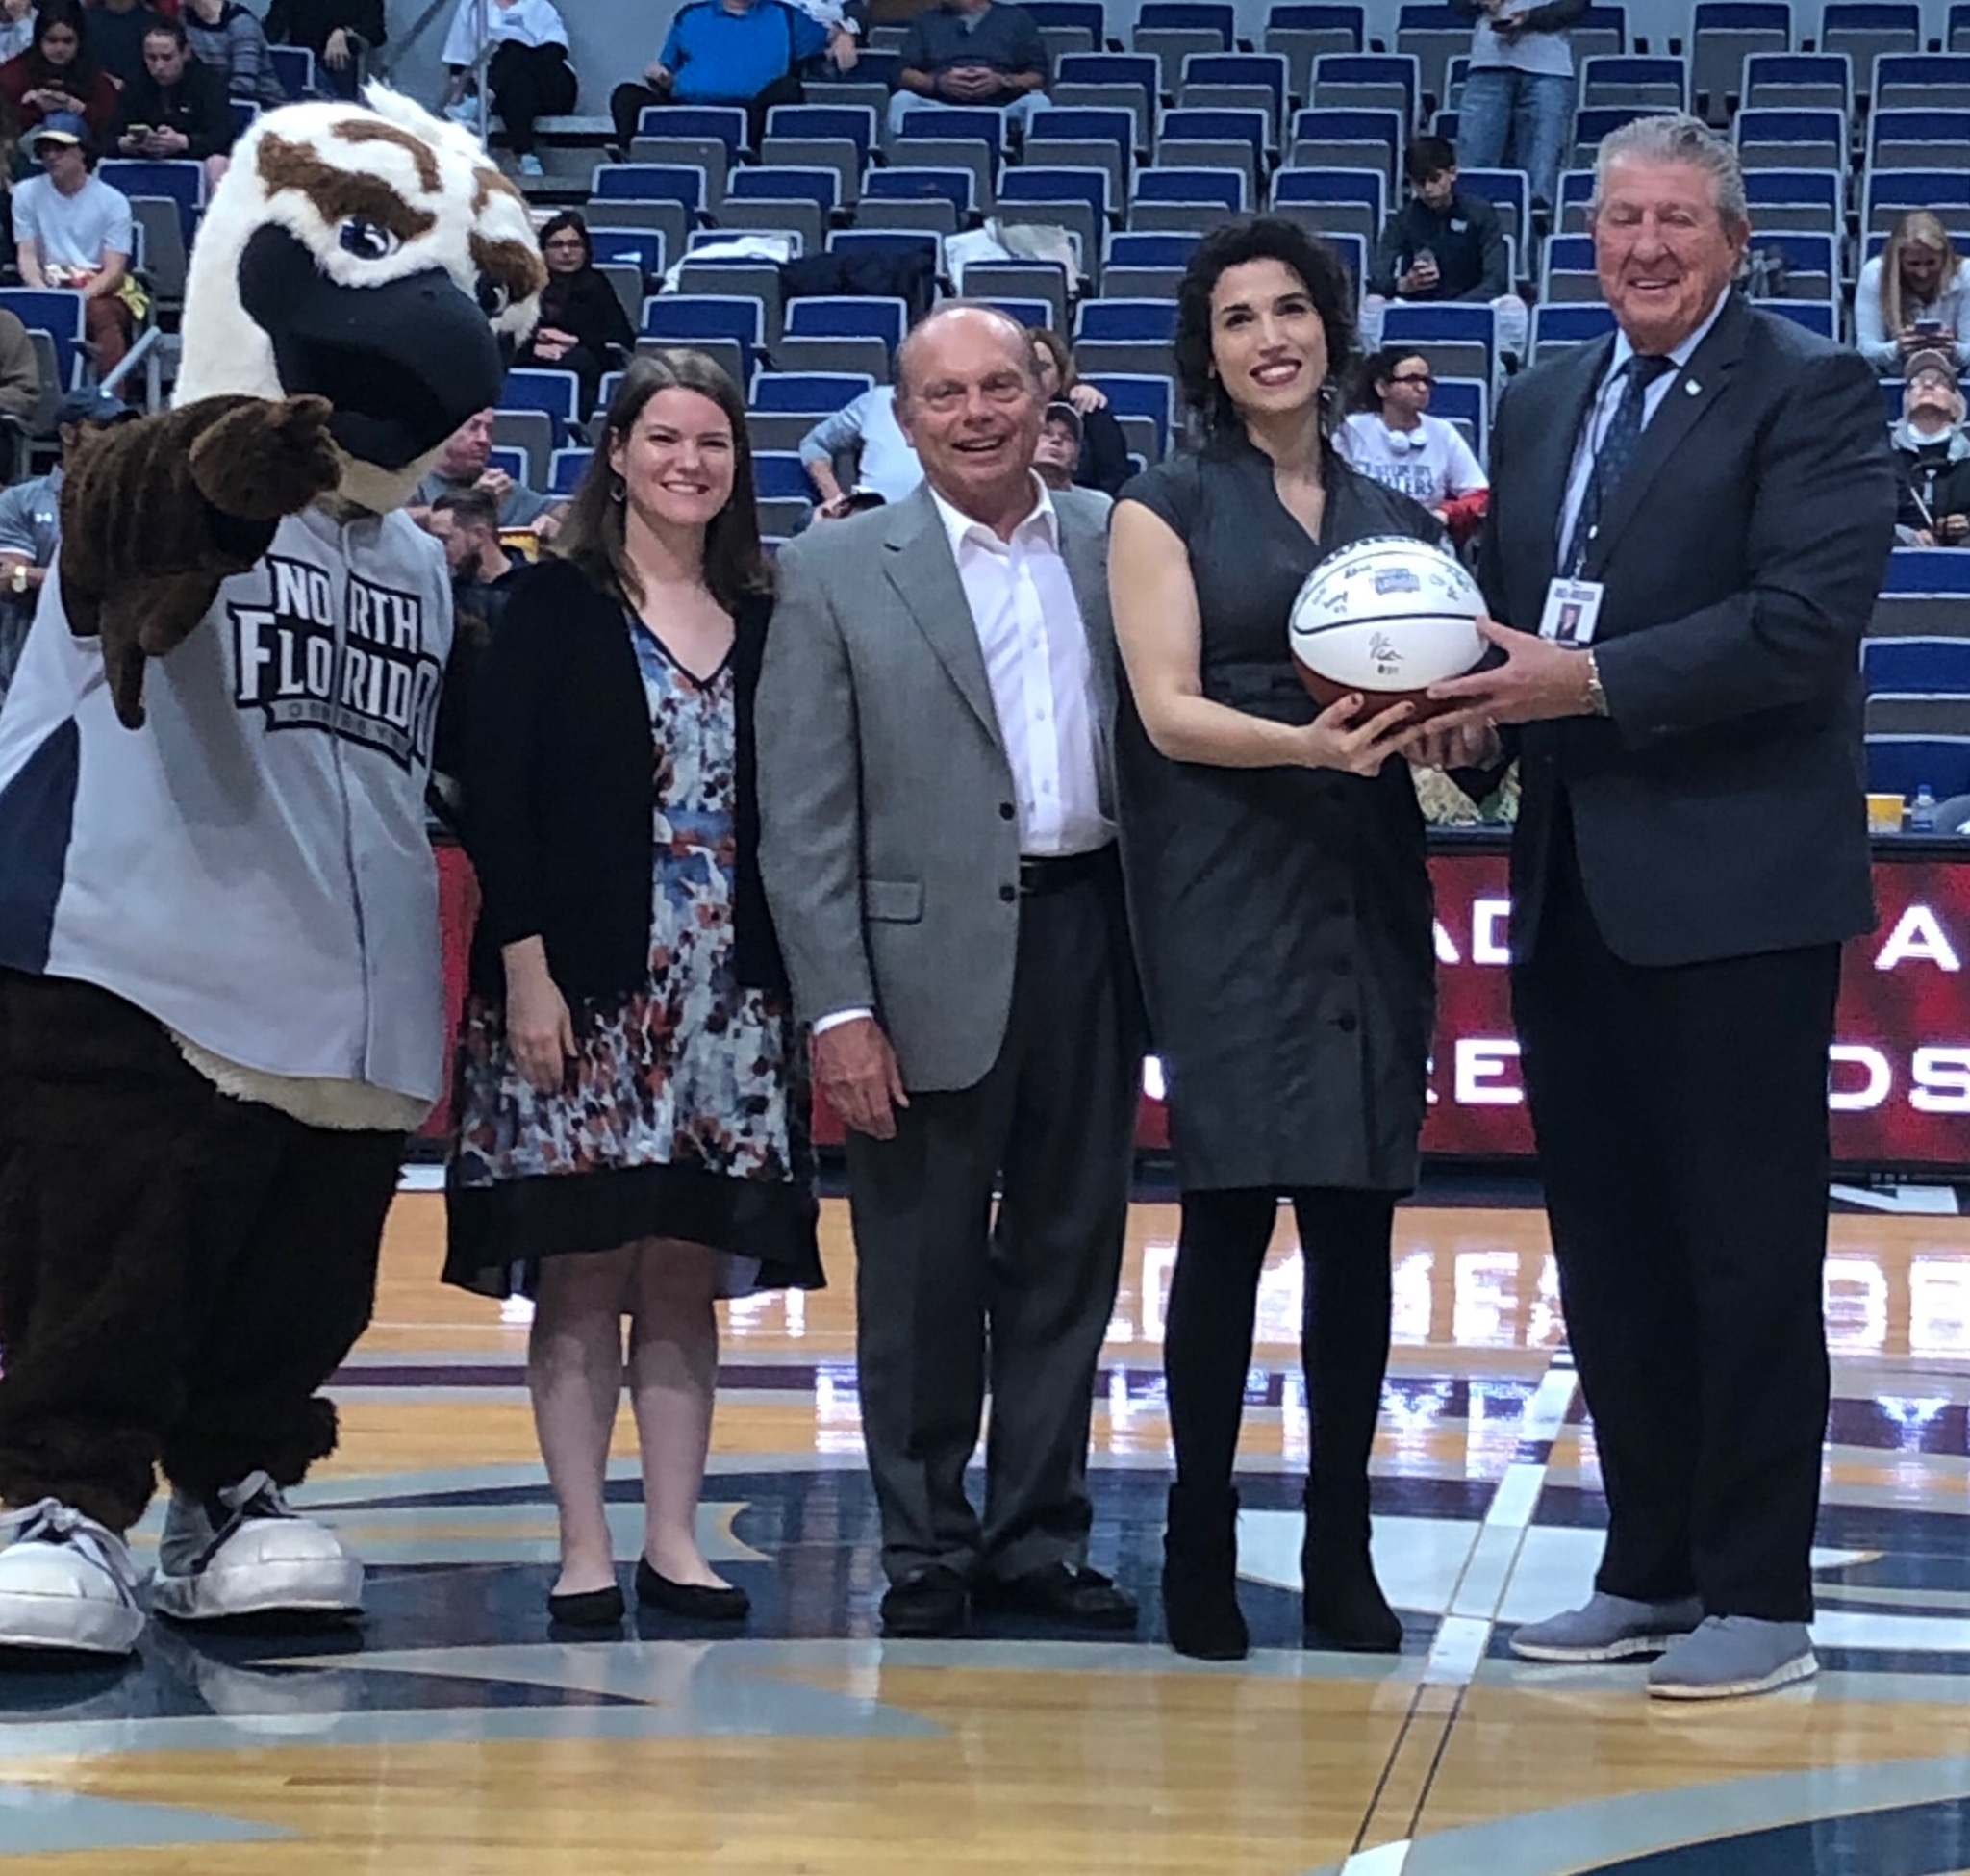 Group of people presenting Josselyn with an award at half court in the arena